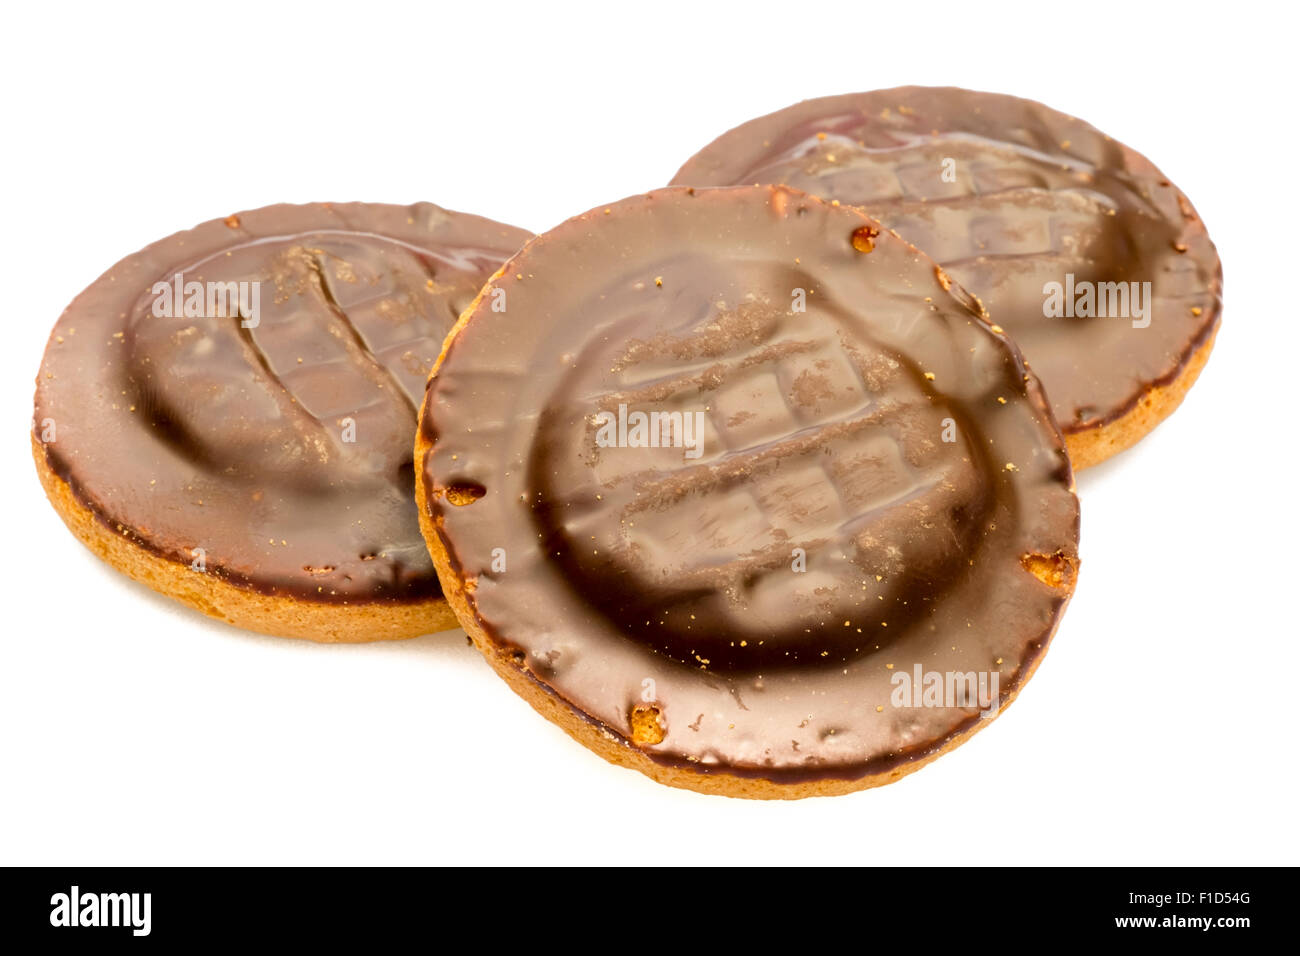 Jaffa Cakes cut out or isolated against a white background, UK. Stock Photo